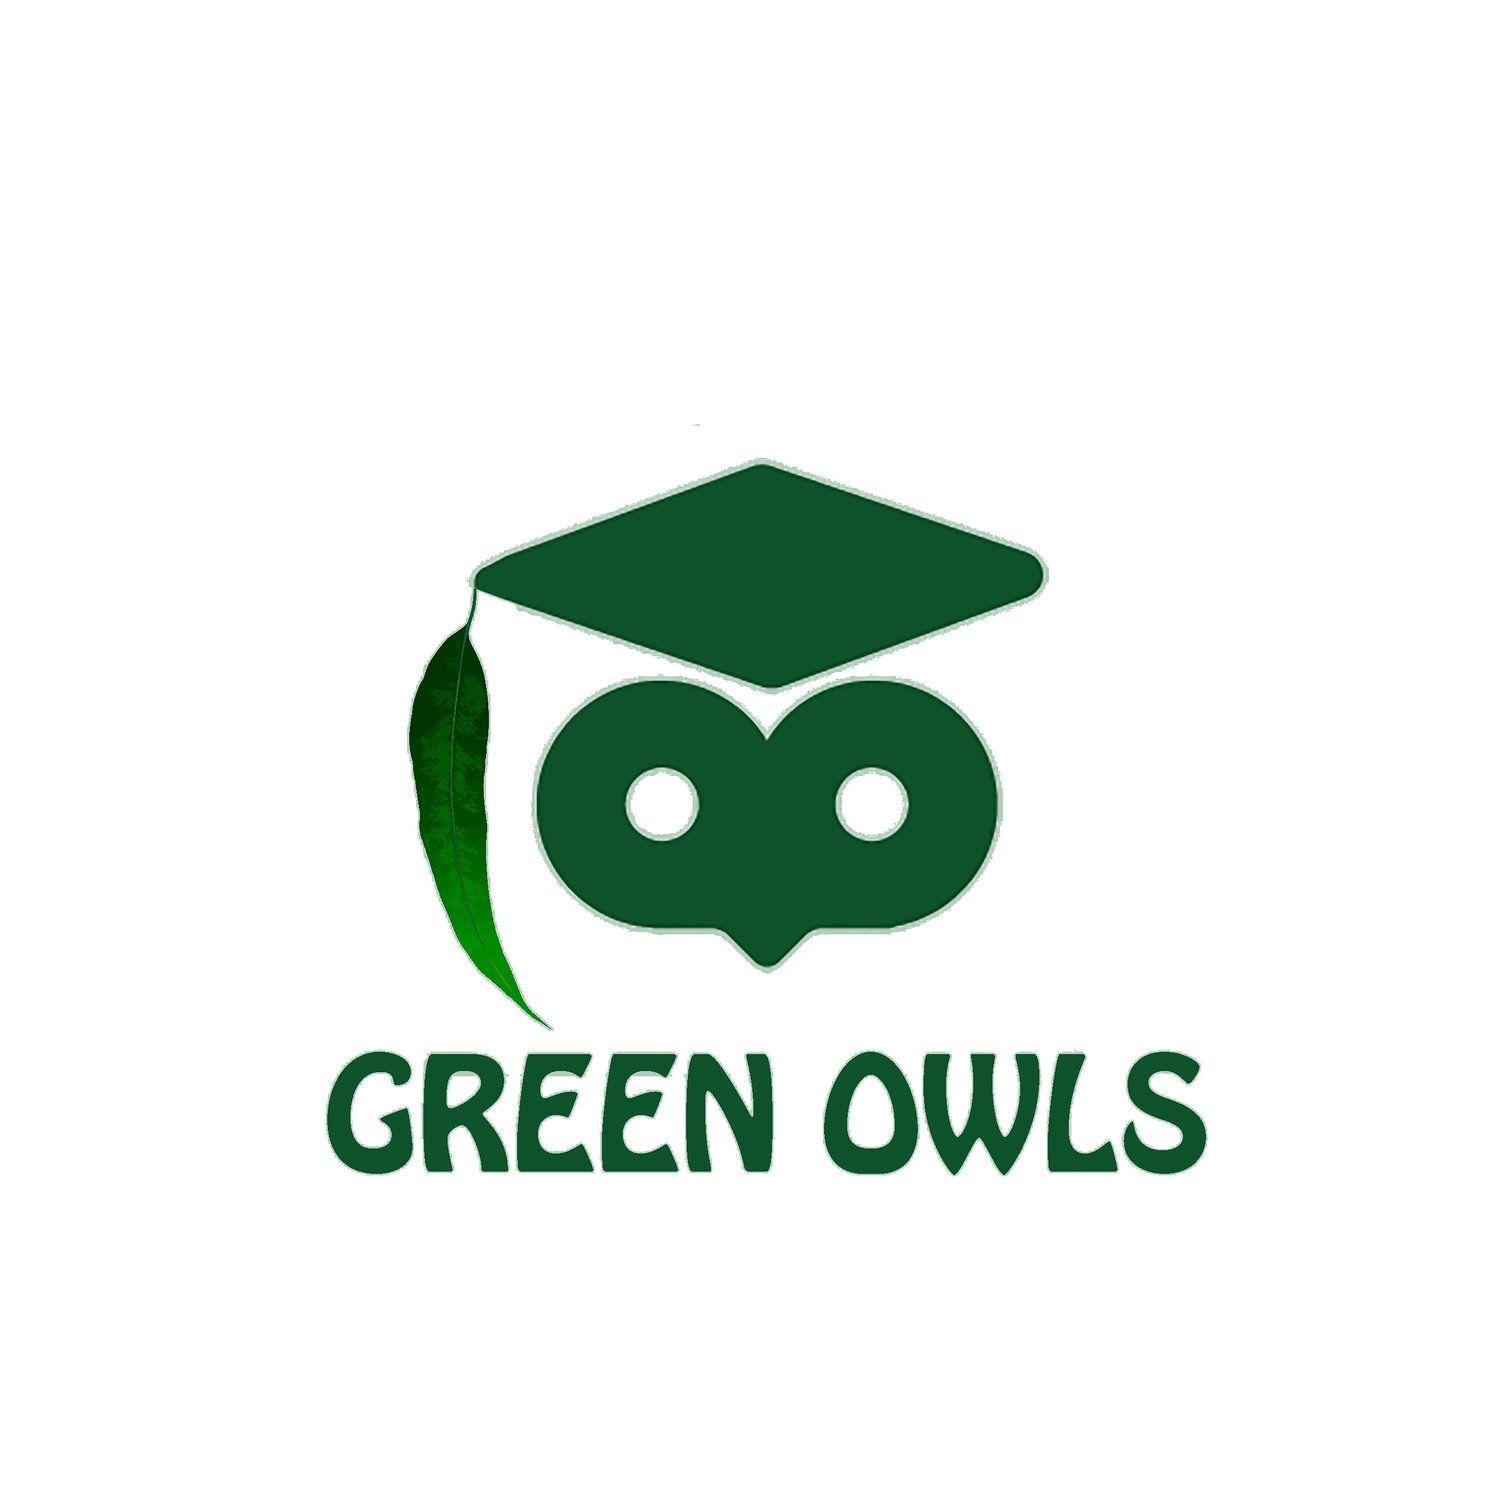 Red and Green Owl Eye Logo - Green Owls